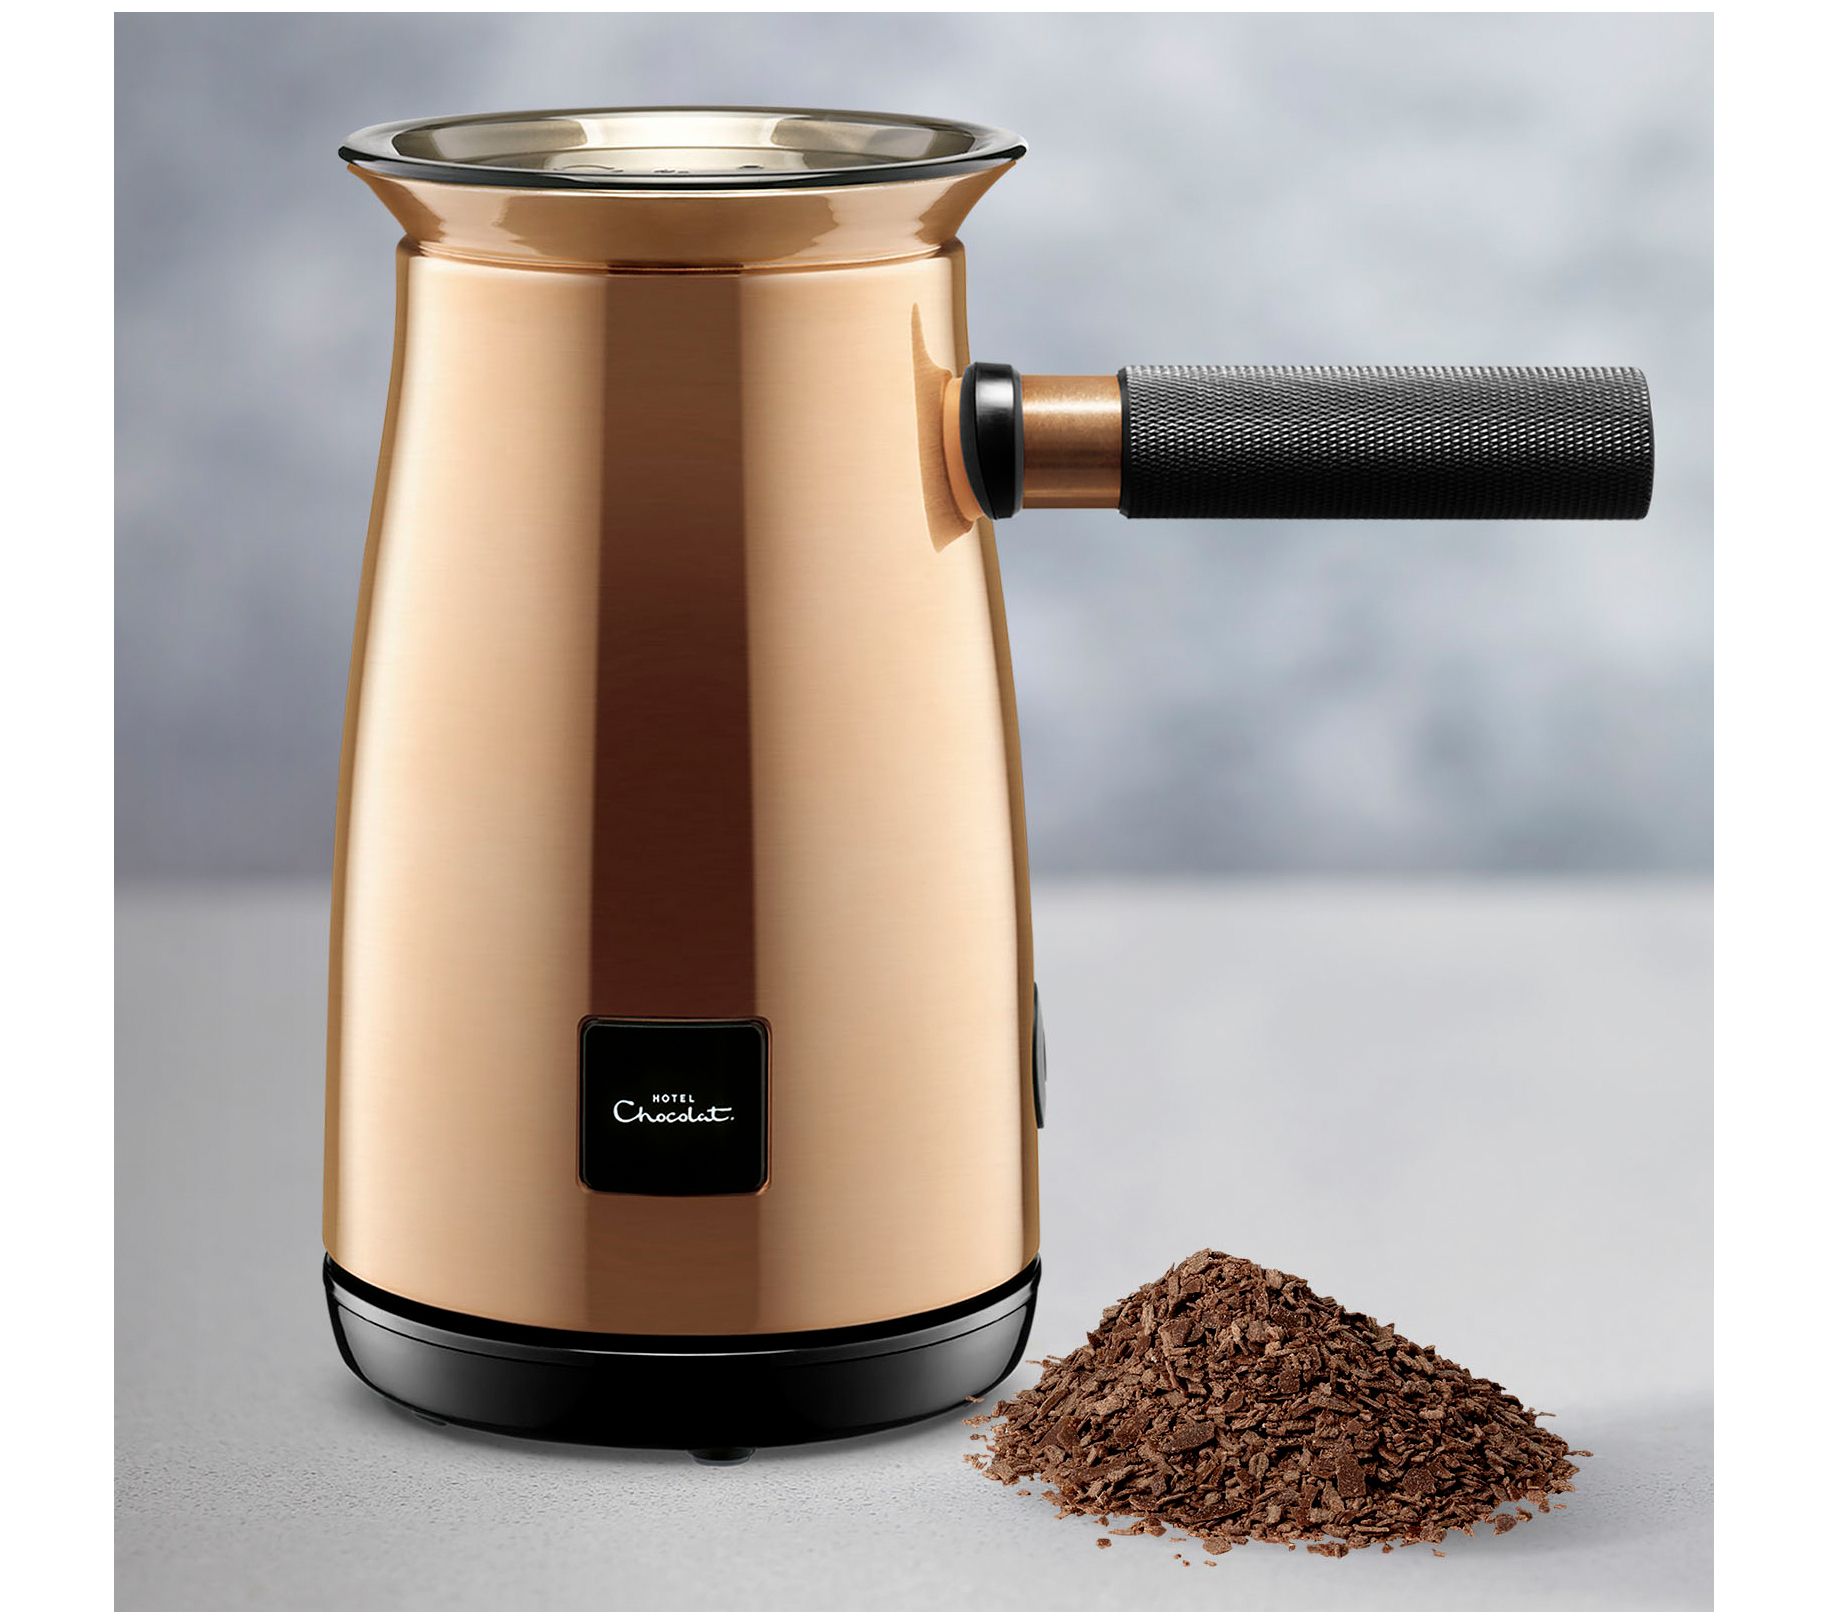 Review & Giveaway: Hotel Chocolat - The Velvetiser - Hot Chocolate Machine  - Vivre Le Rêve